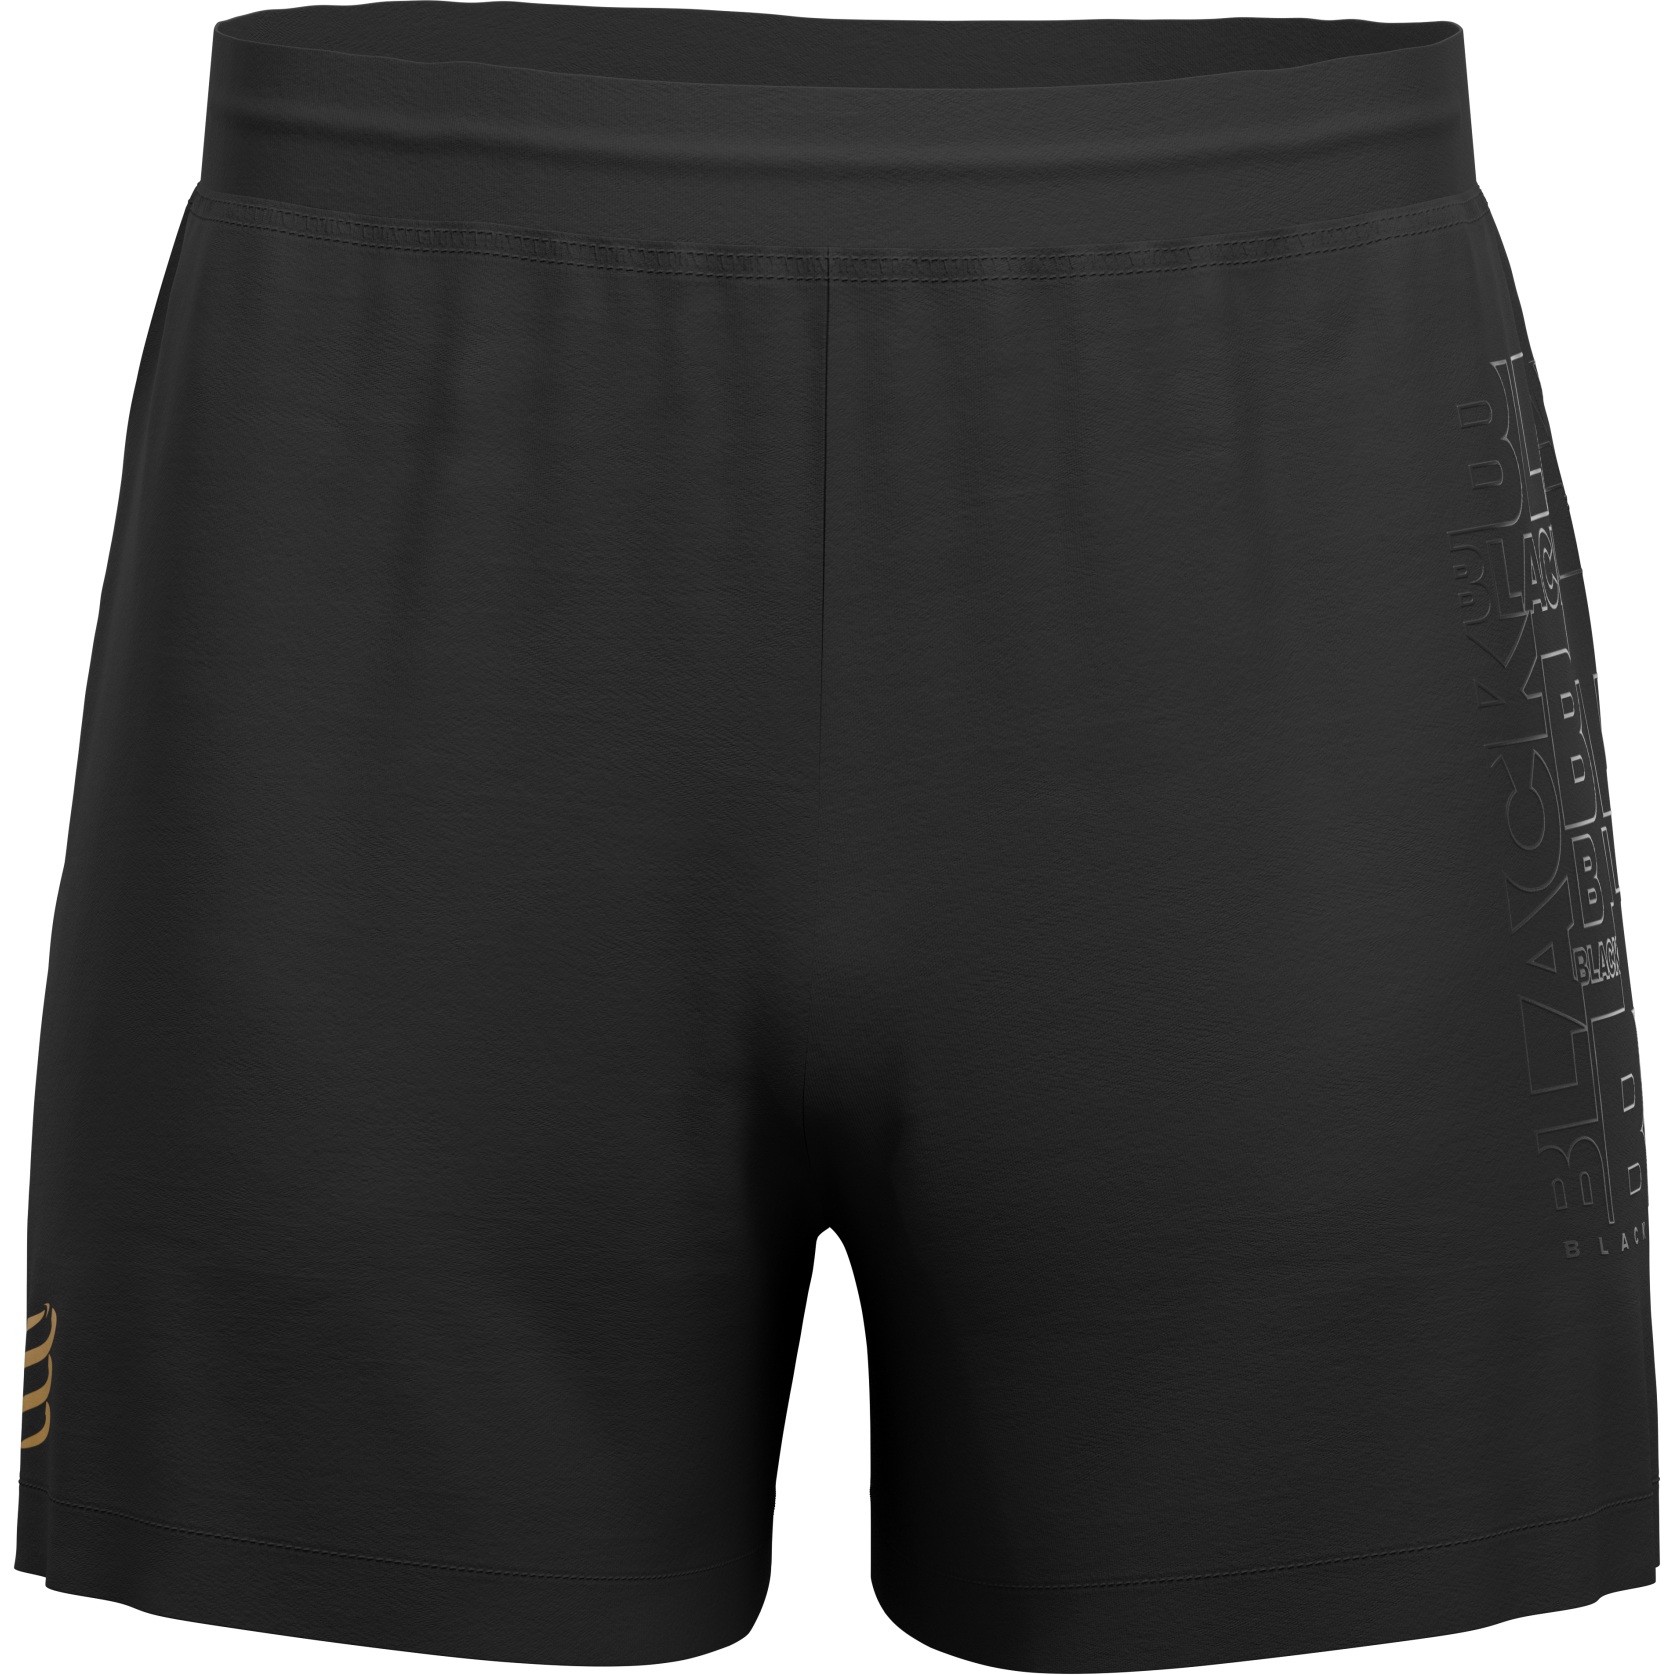 Picture of Compressport Performance Running Shorts - Black Edition 2022 - black